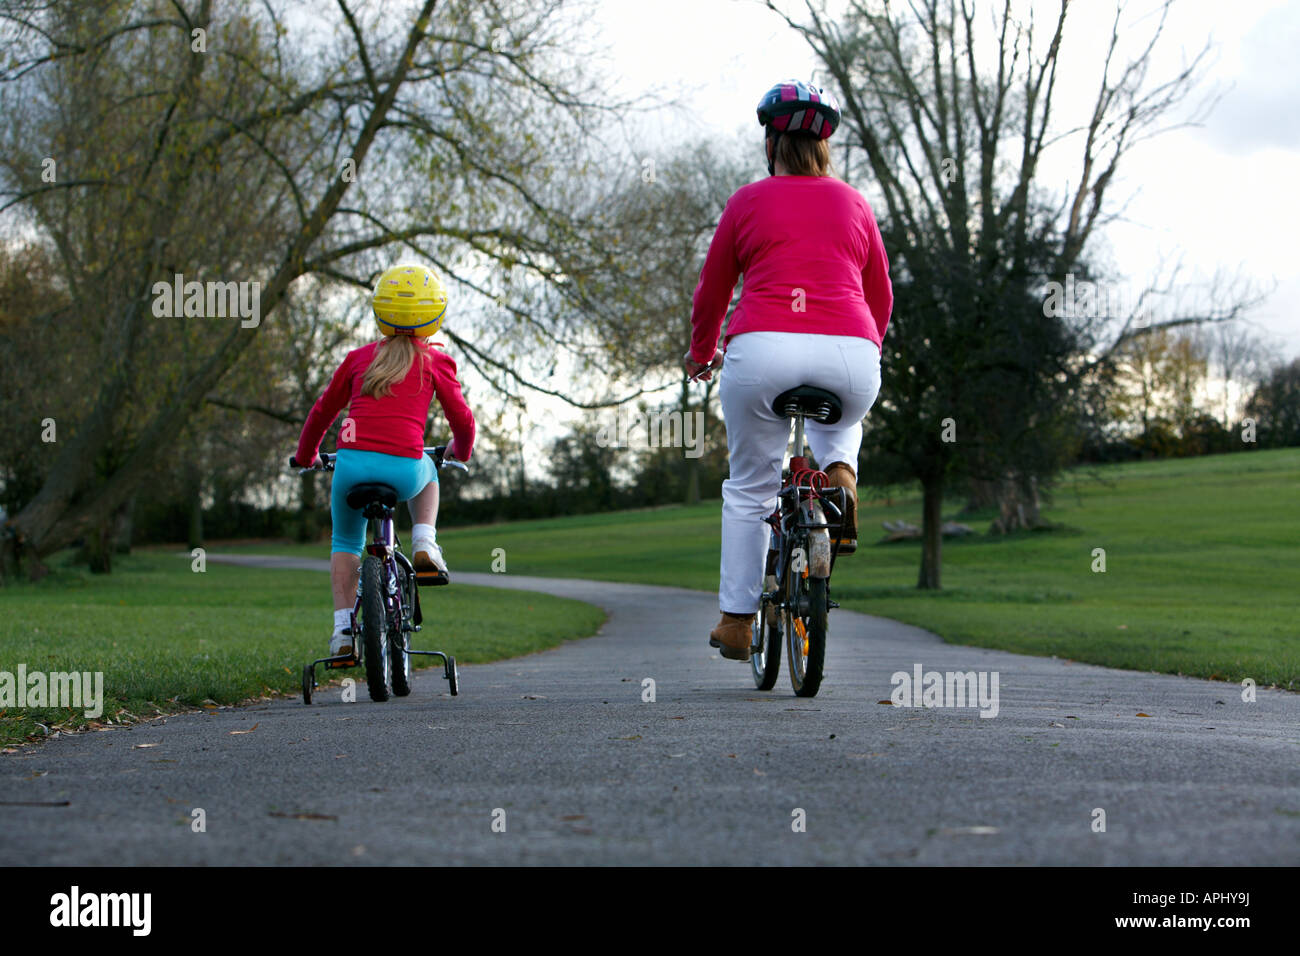 A young girl and a lady ride push bikes through a park Stock Photo